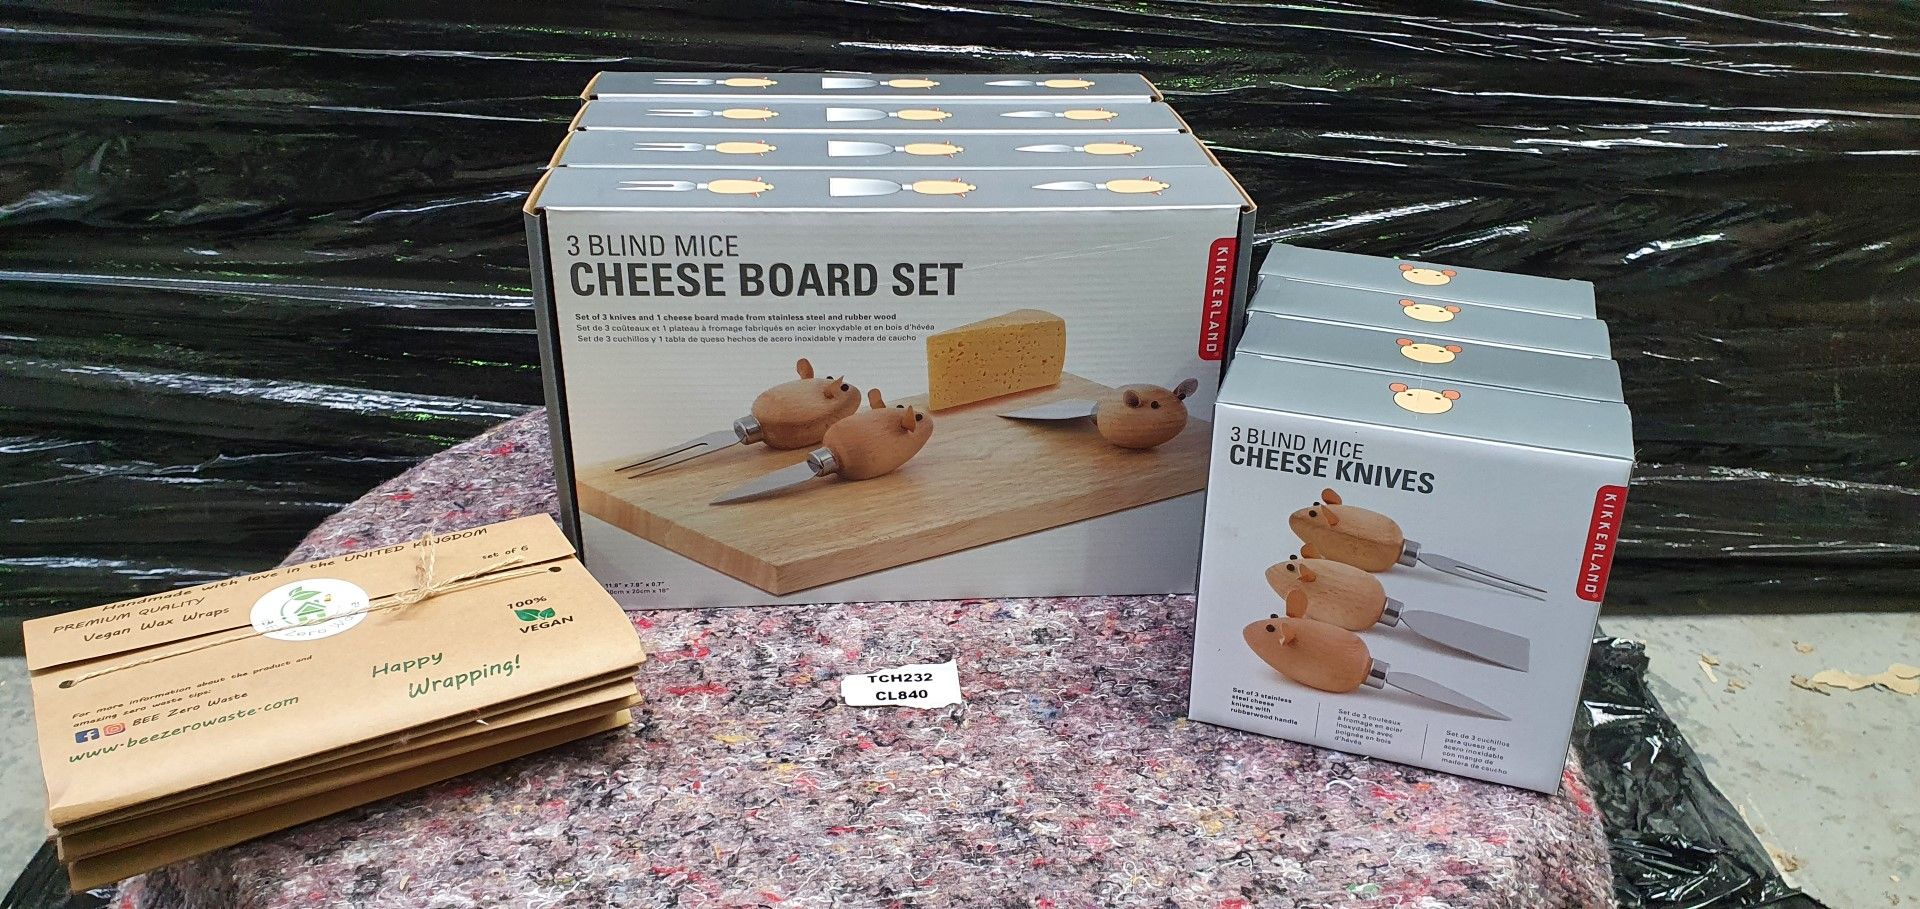 4 x Three Blind Mice Cheese Board and Knife Sets, 4 x Cheese Knife Sets and 4 x Vegan Wax Wraps - - Image 6 of 6